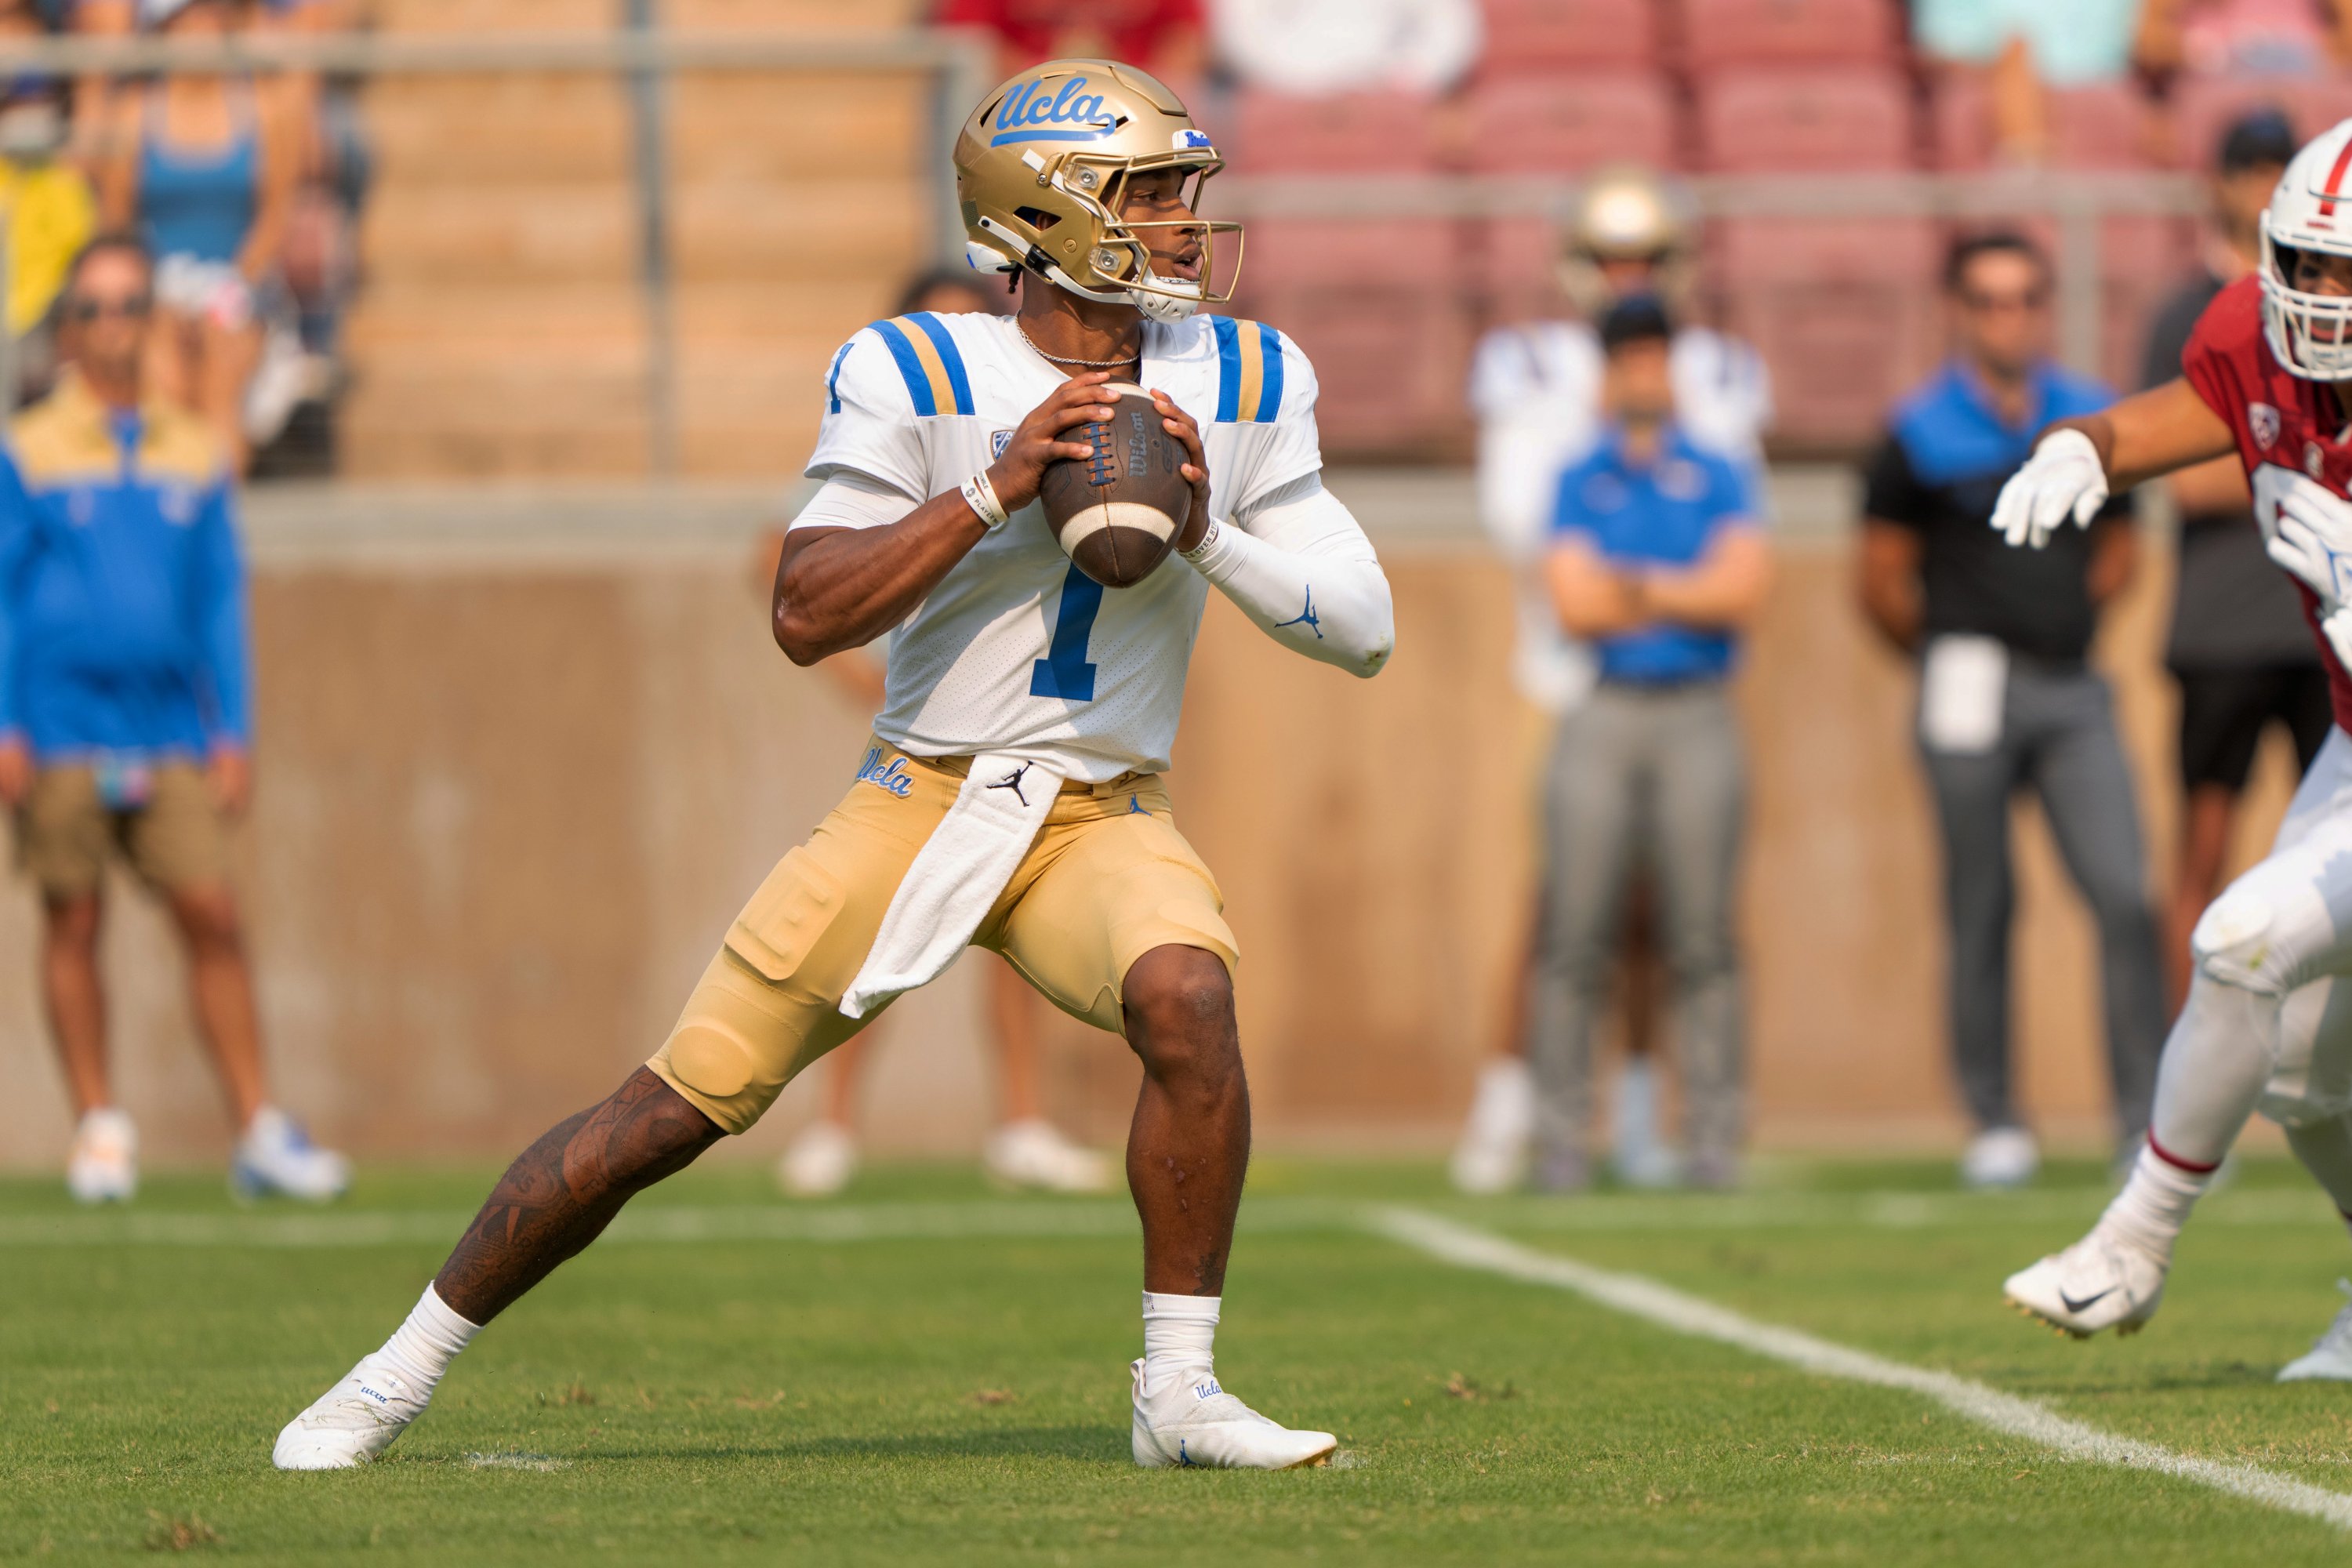 UCLA Bruins quarterback Dorian Thompson-Robinson (1) drops back to throw the football against the Stanford Cardinal during the first quarter at Stanford Stadium, Stanford, California, U.S., Sept. 25, 2021. (Stan Szeto-USA TODAY Sports via Reuters)